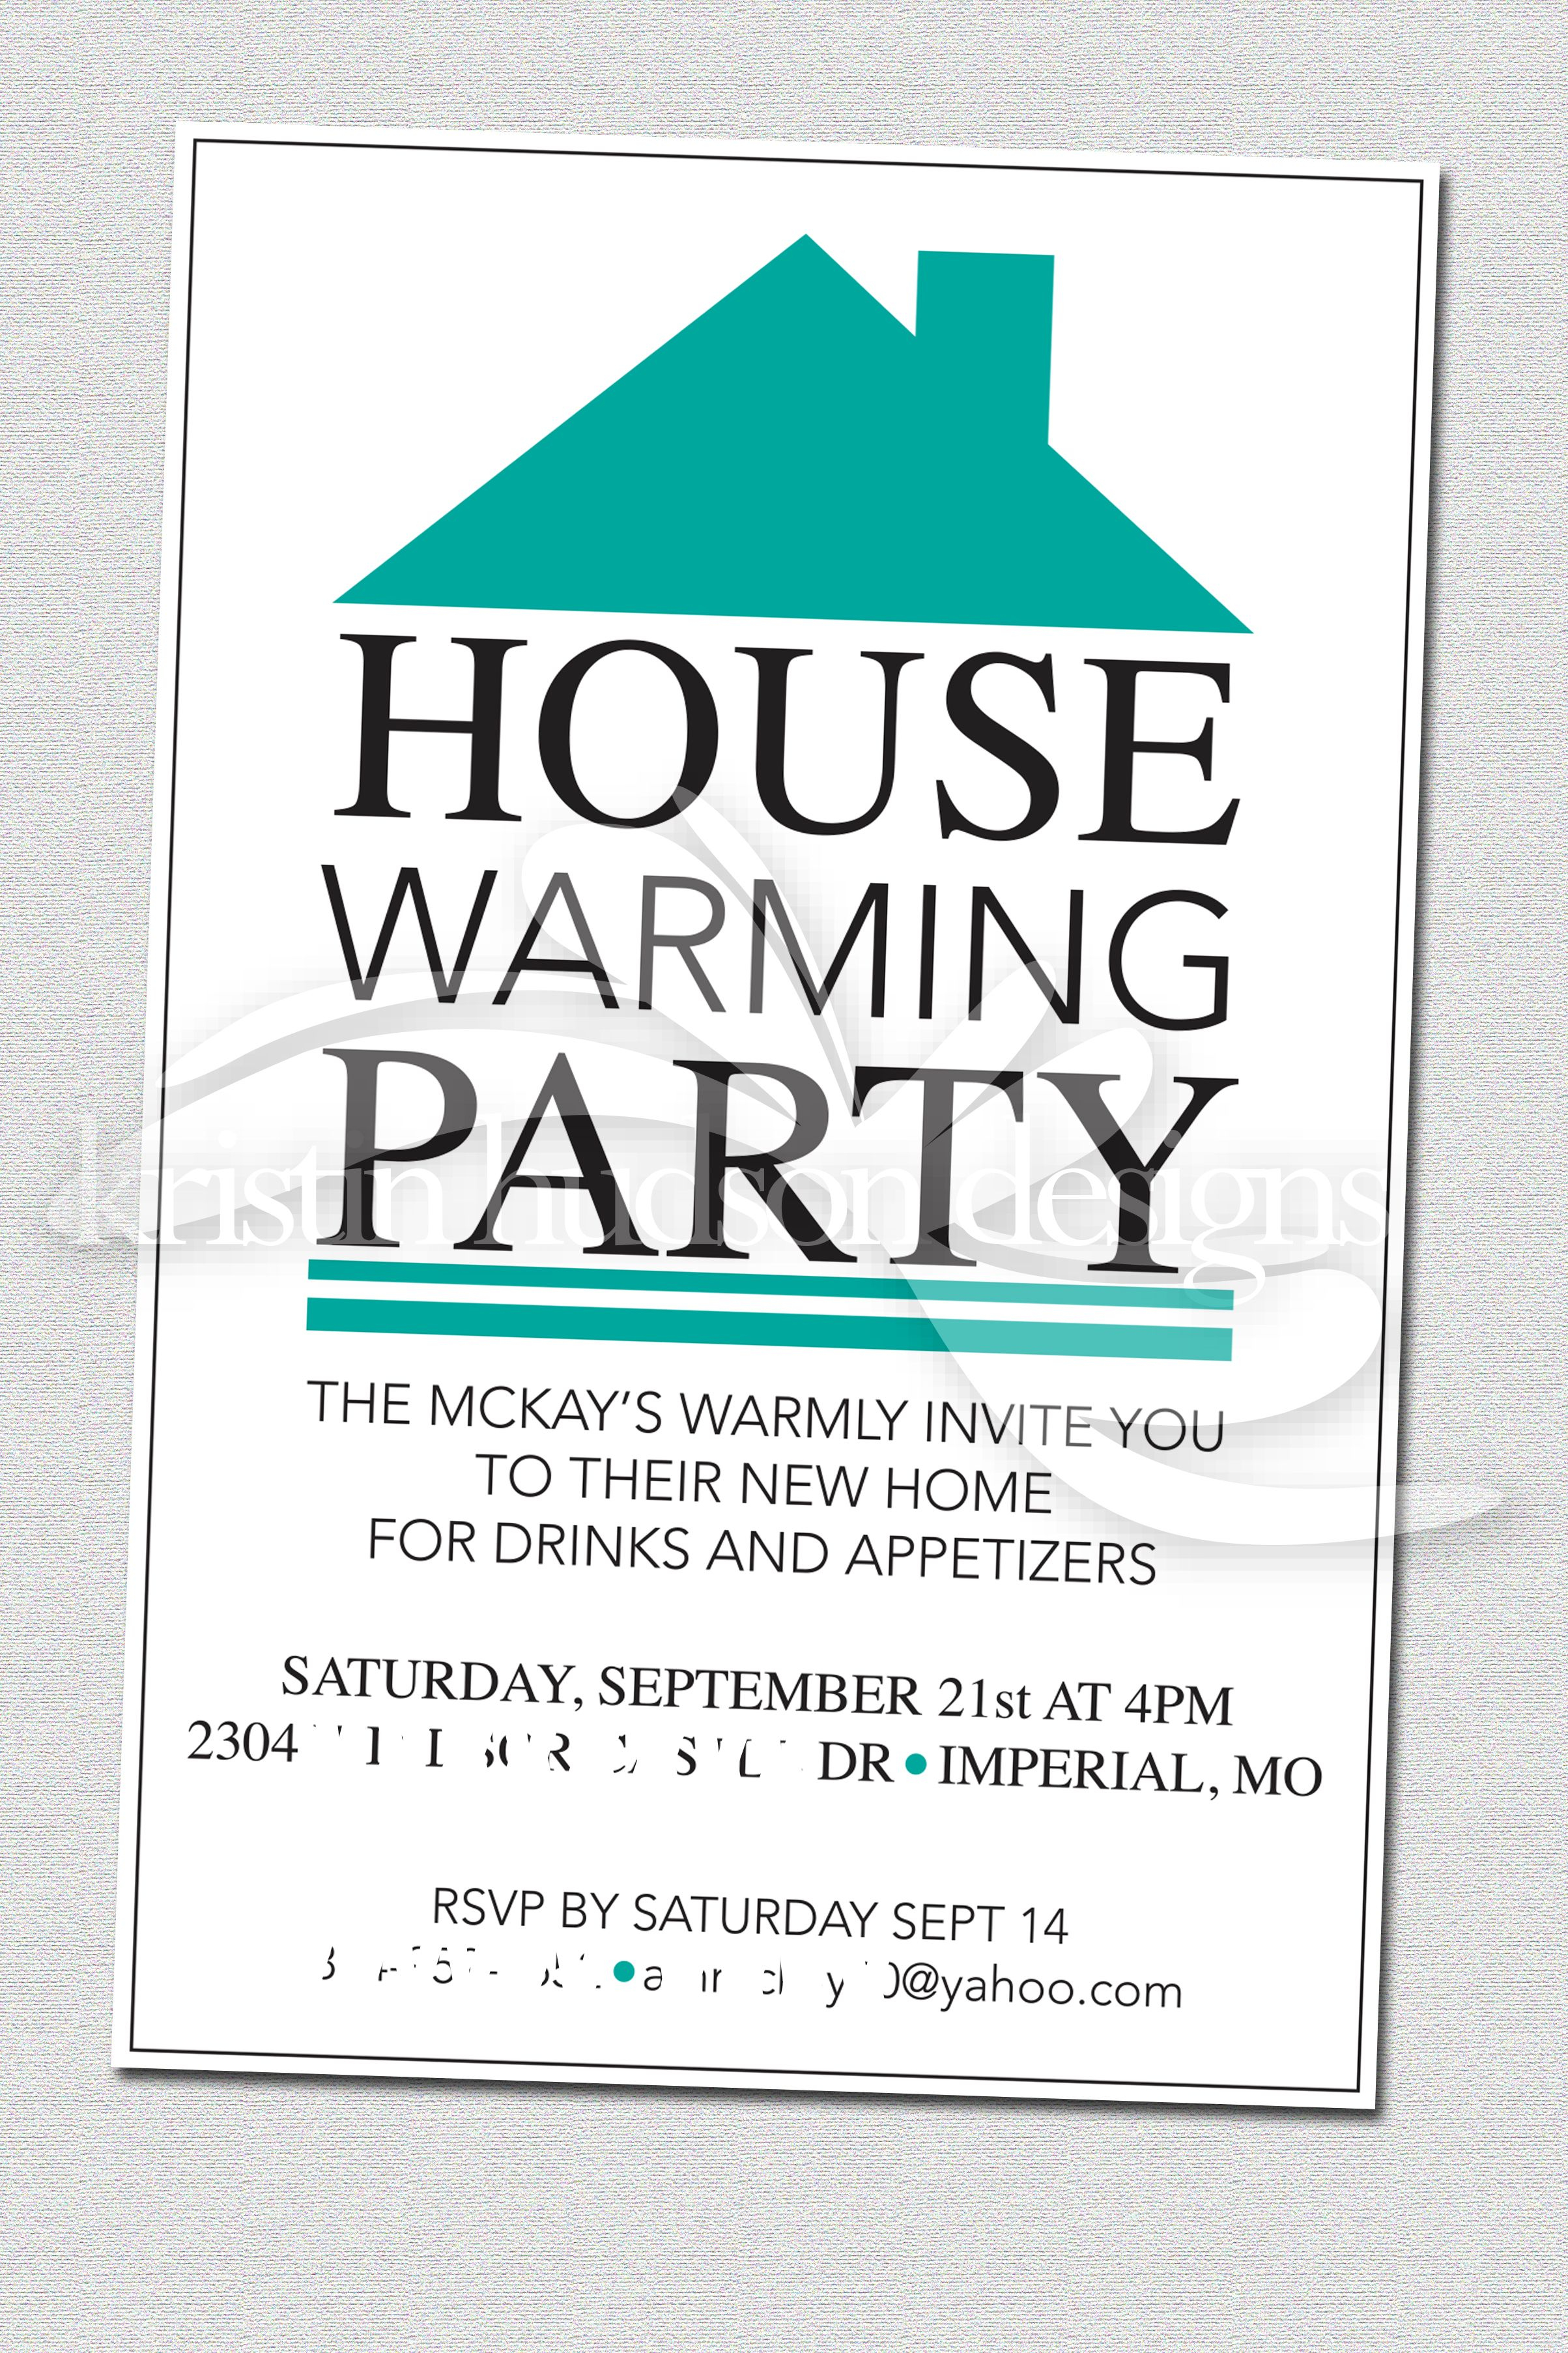 House Warming Party Invite Designs Kristin Hudson Invitations throughout measurements 2407 X 3611